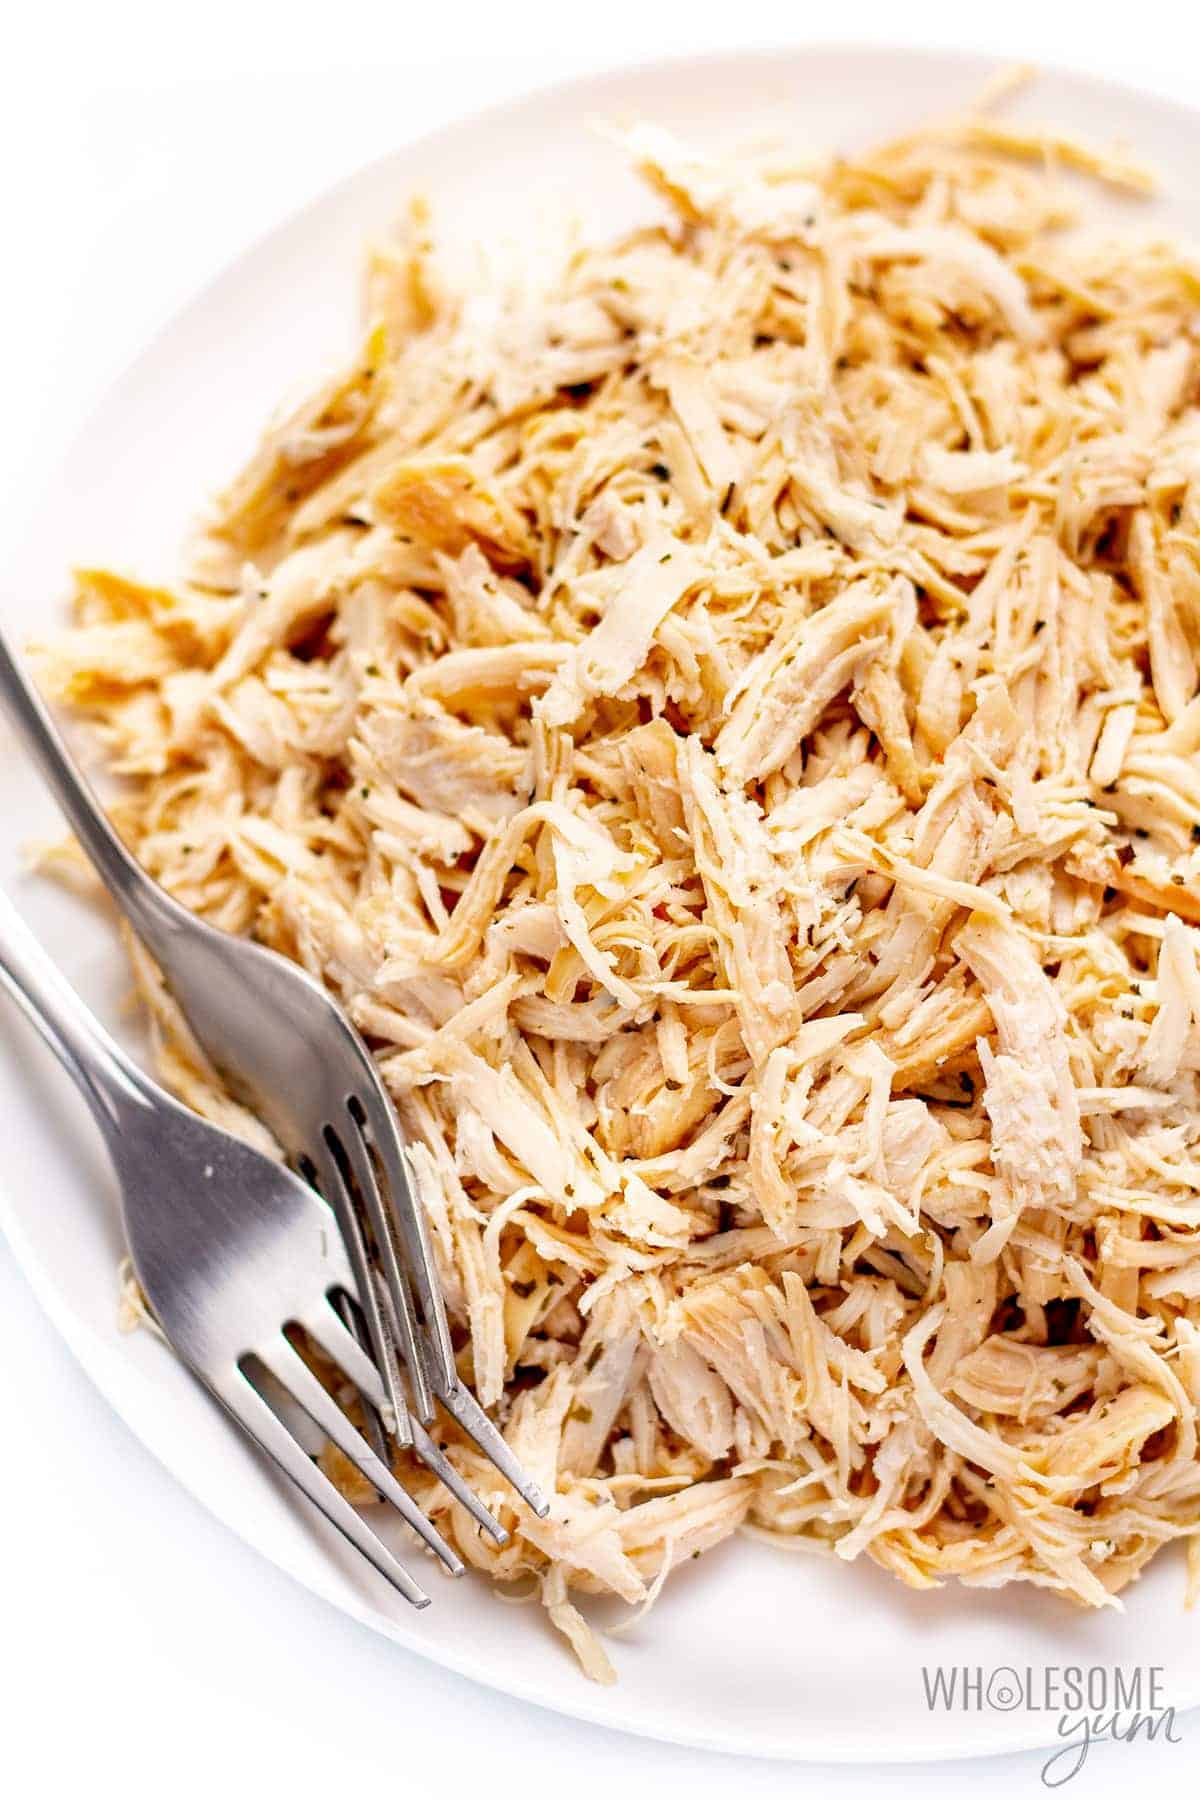 Shredded Instant Pot chicken breast on a plate.